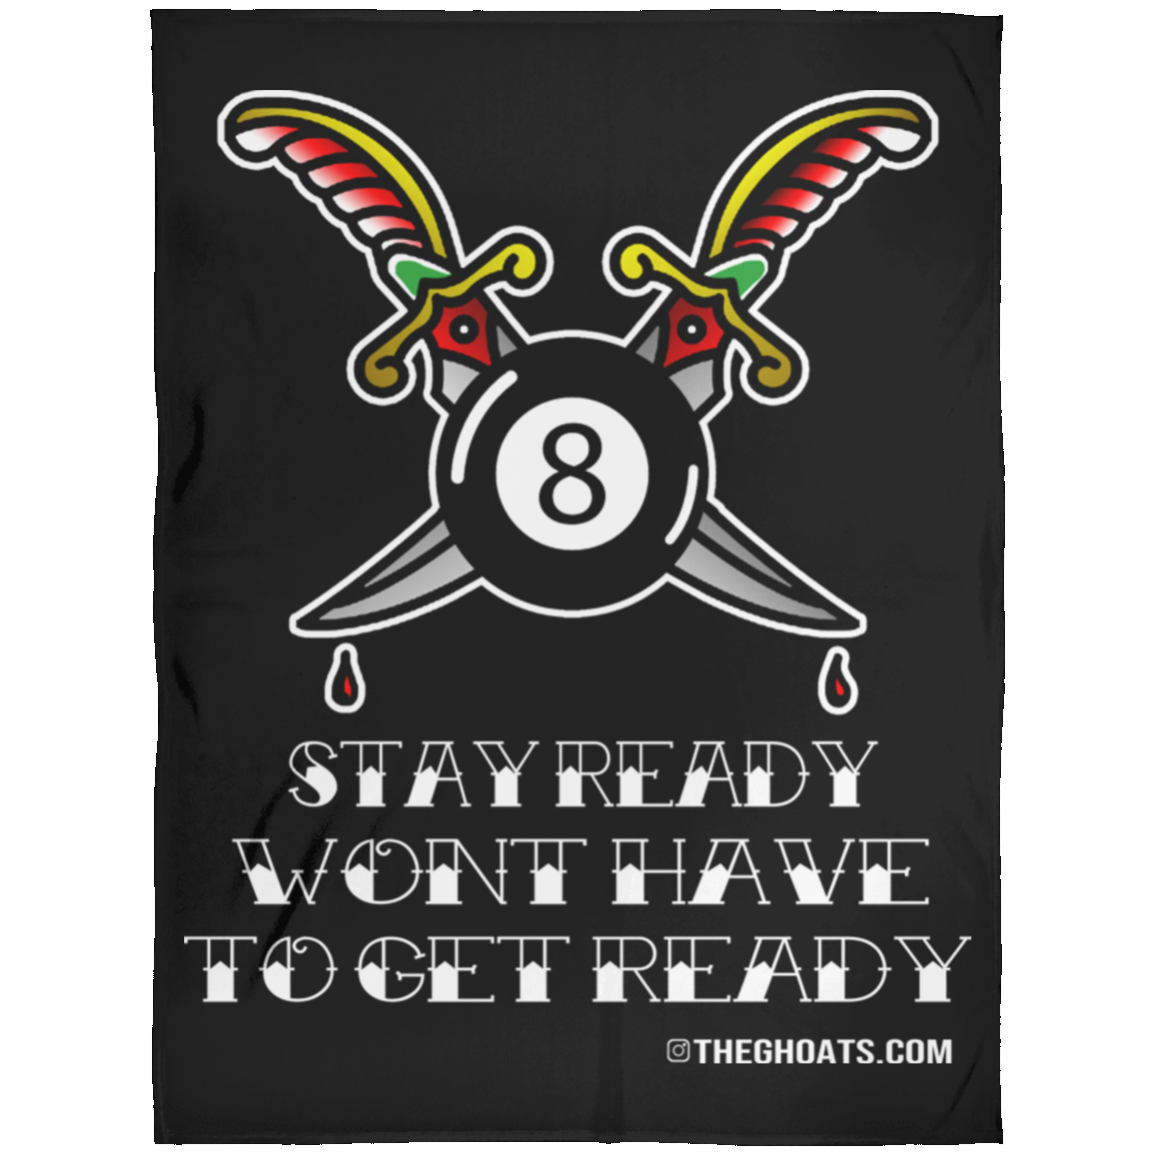 The GHOATS Custom Design #36. Stay Ready Won't Have to Get Ready. Tattoo Style. Ver. 1/2. Fleece Blanket 60x80